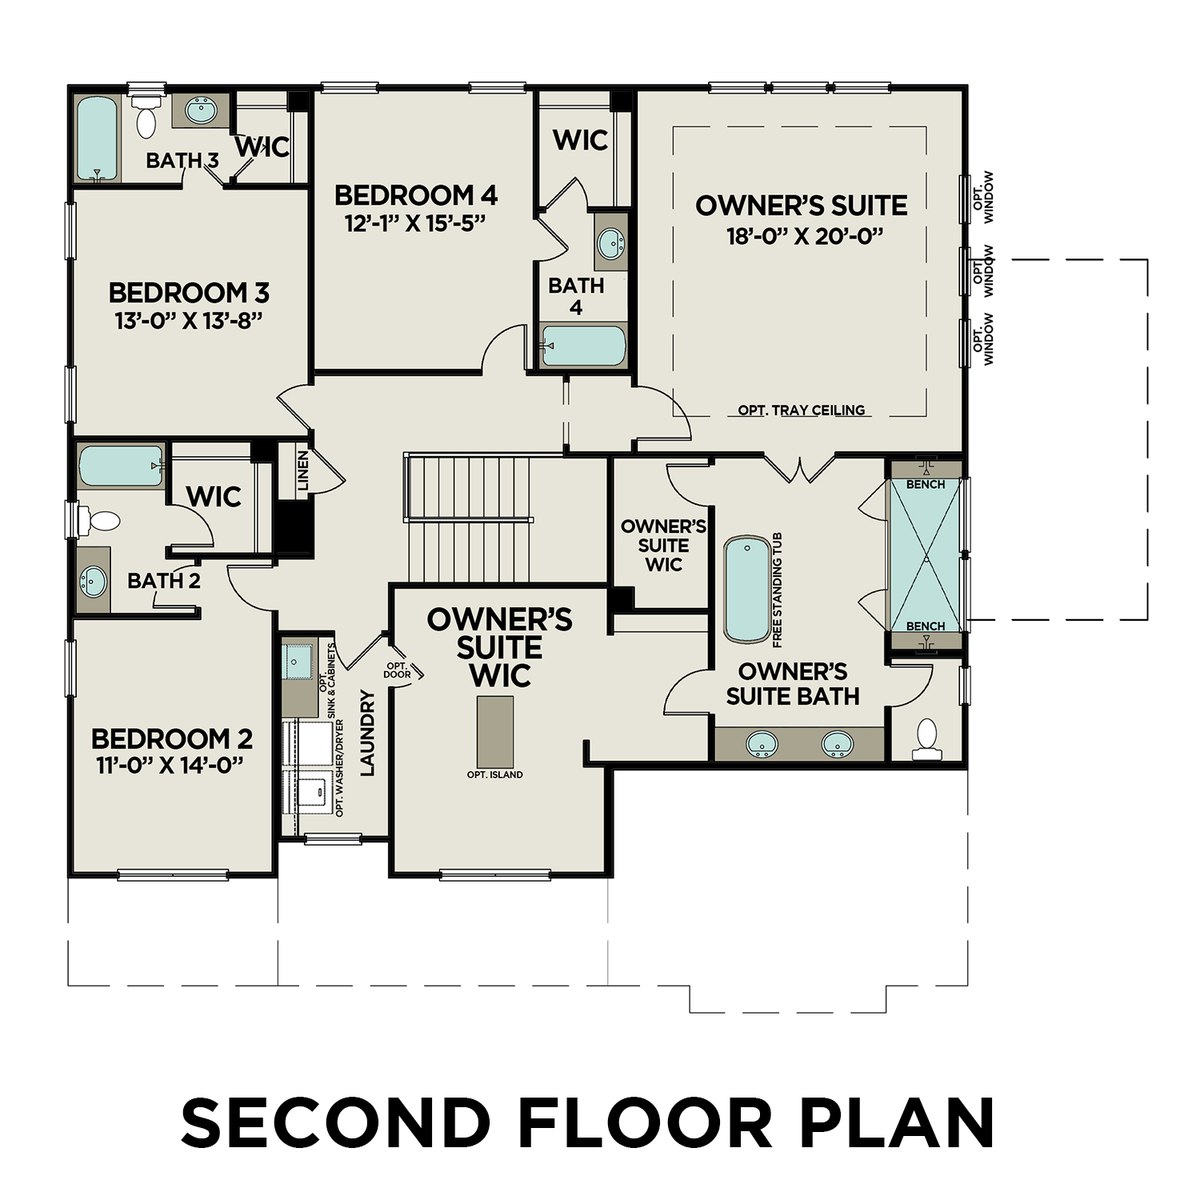 2 - The Arlington A buildable floor plan layout in Davidson Homes' Tanglewood community.